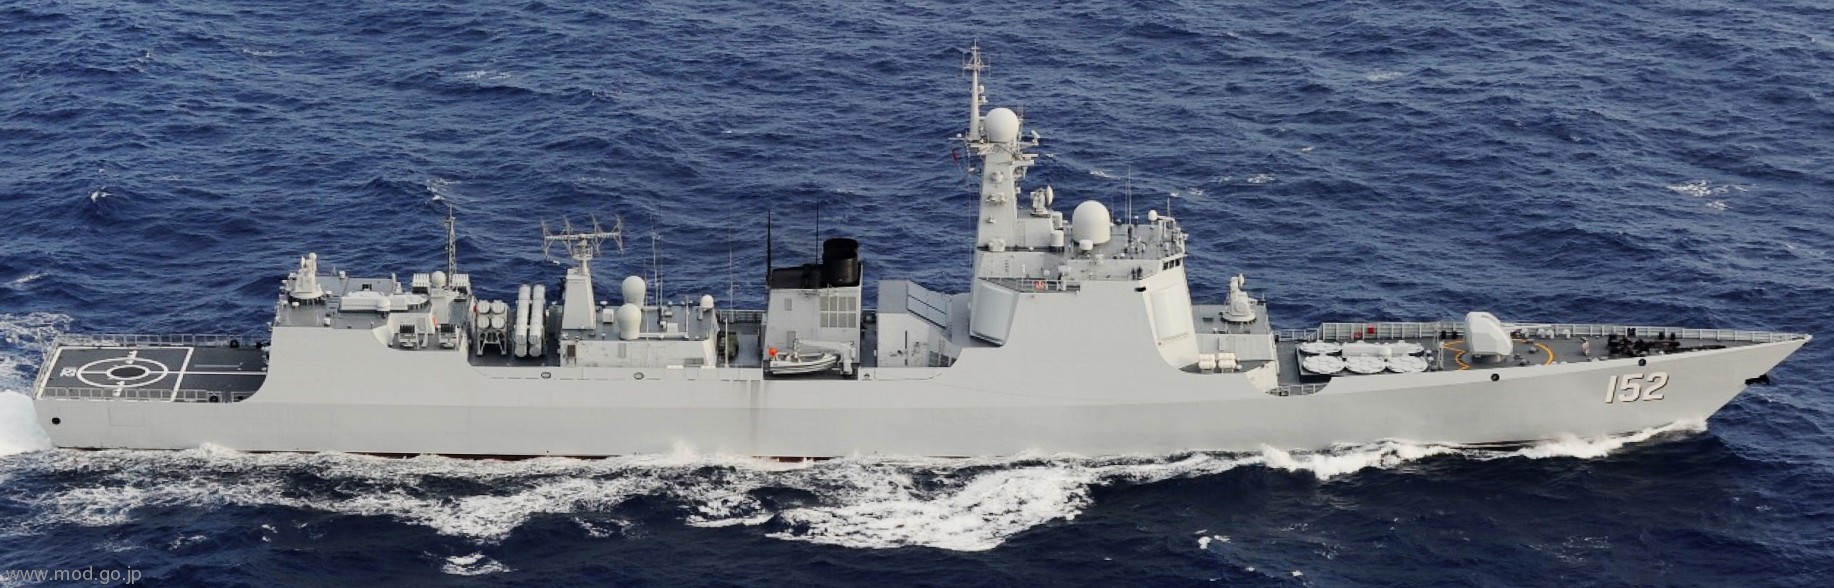 ddg-152 plans jinan type 052c class guided missile destroyer china people's liberation army navy 02